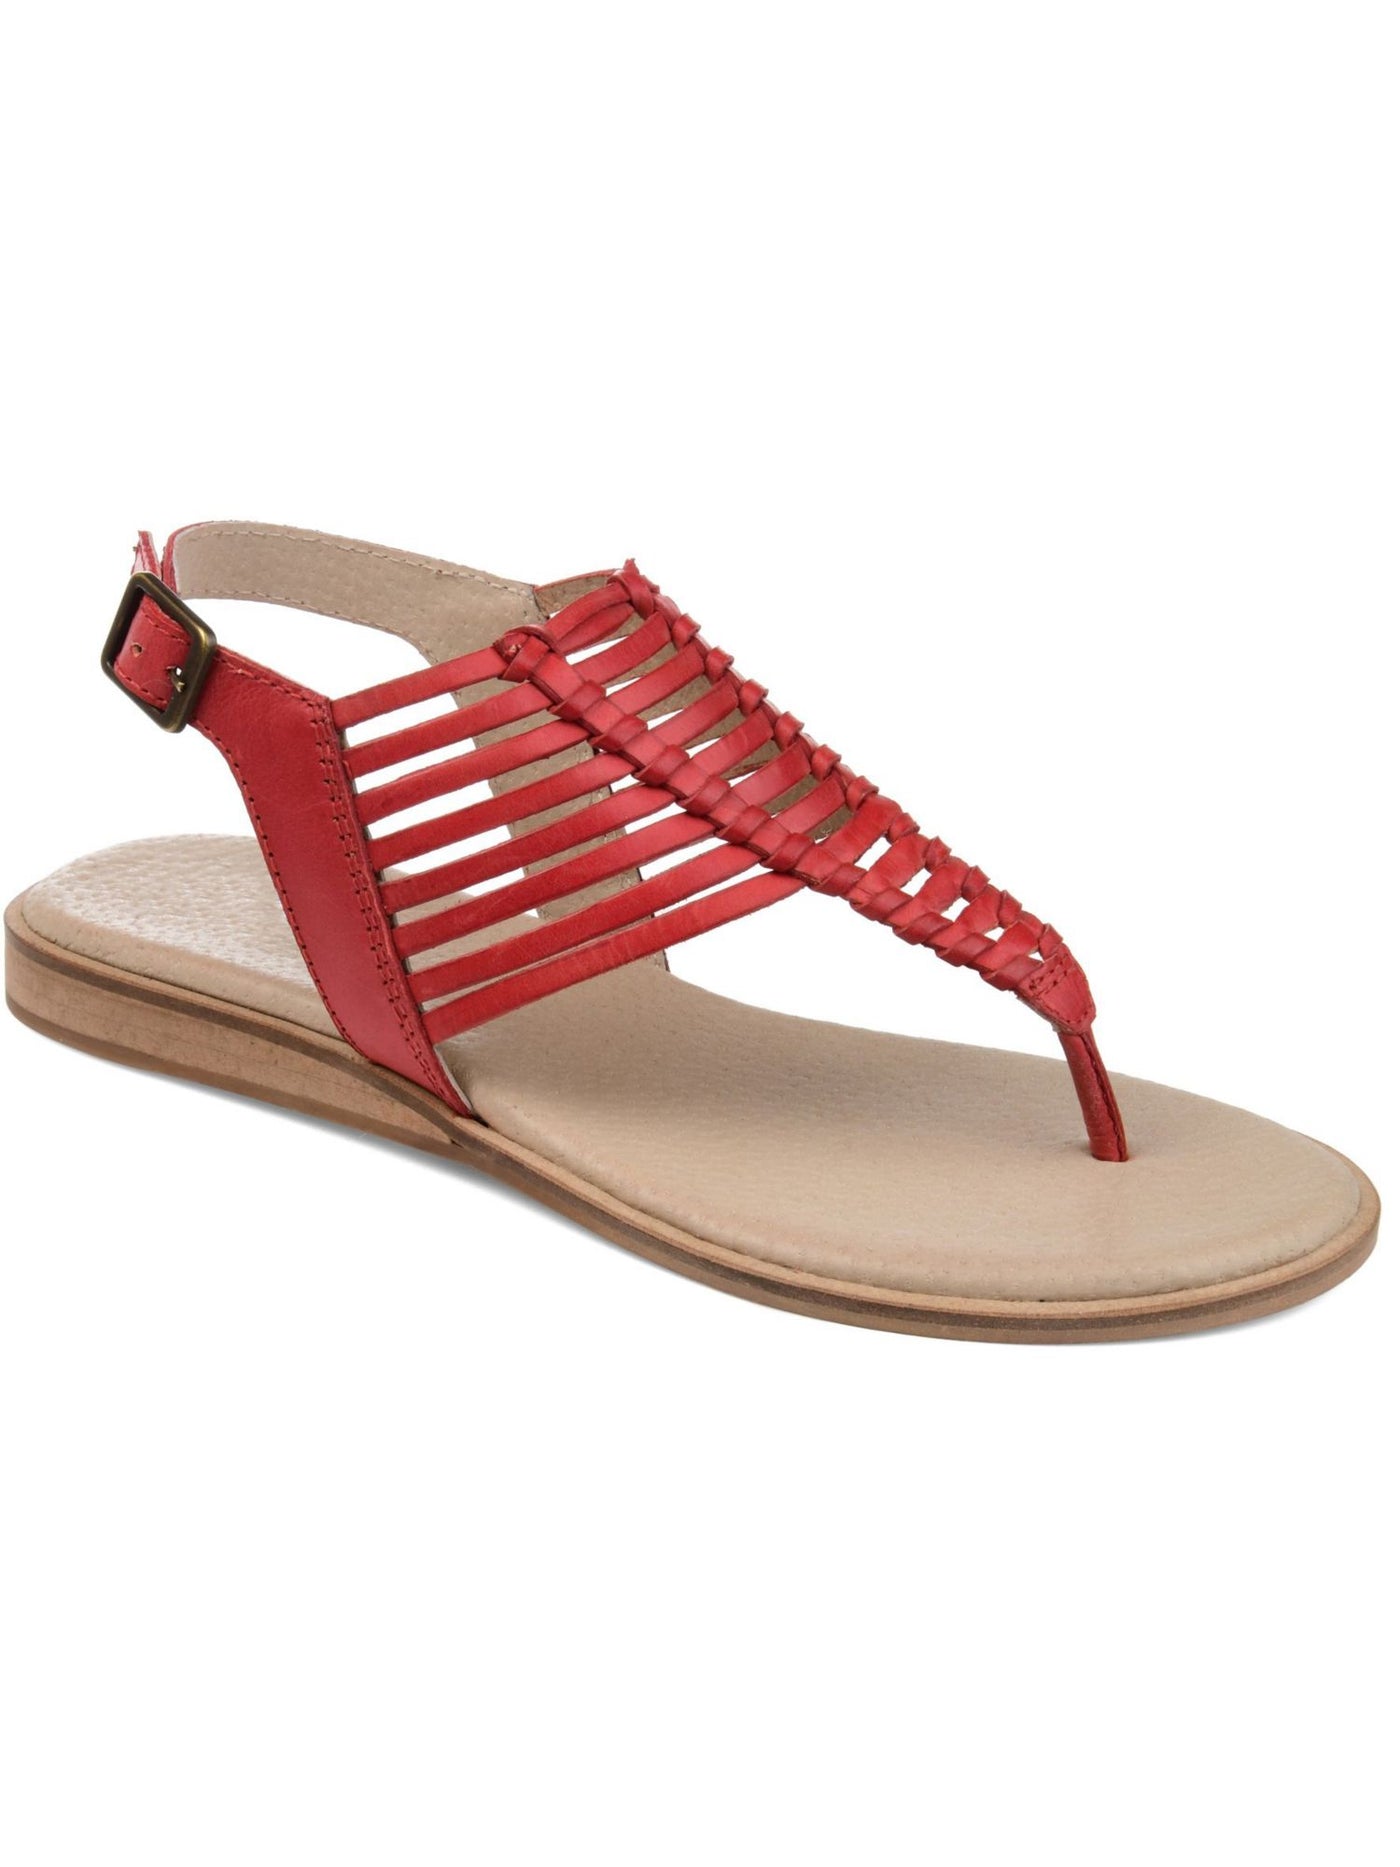 JOURNEE SIGNATURE Womens Red Wedge Fishbone Detail Traction Sole Cushioned Adjustable Strap Davis Round Toe Wedge Buckle Leather Slingback Sandal 7 M